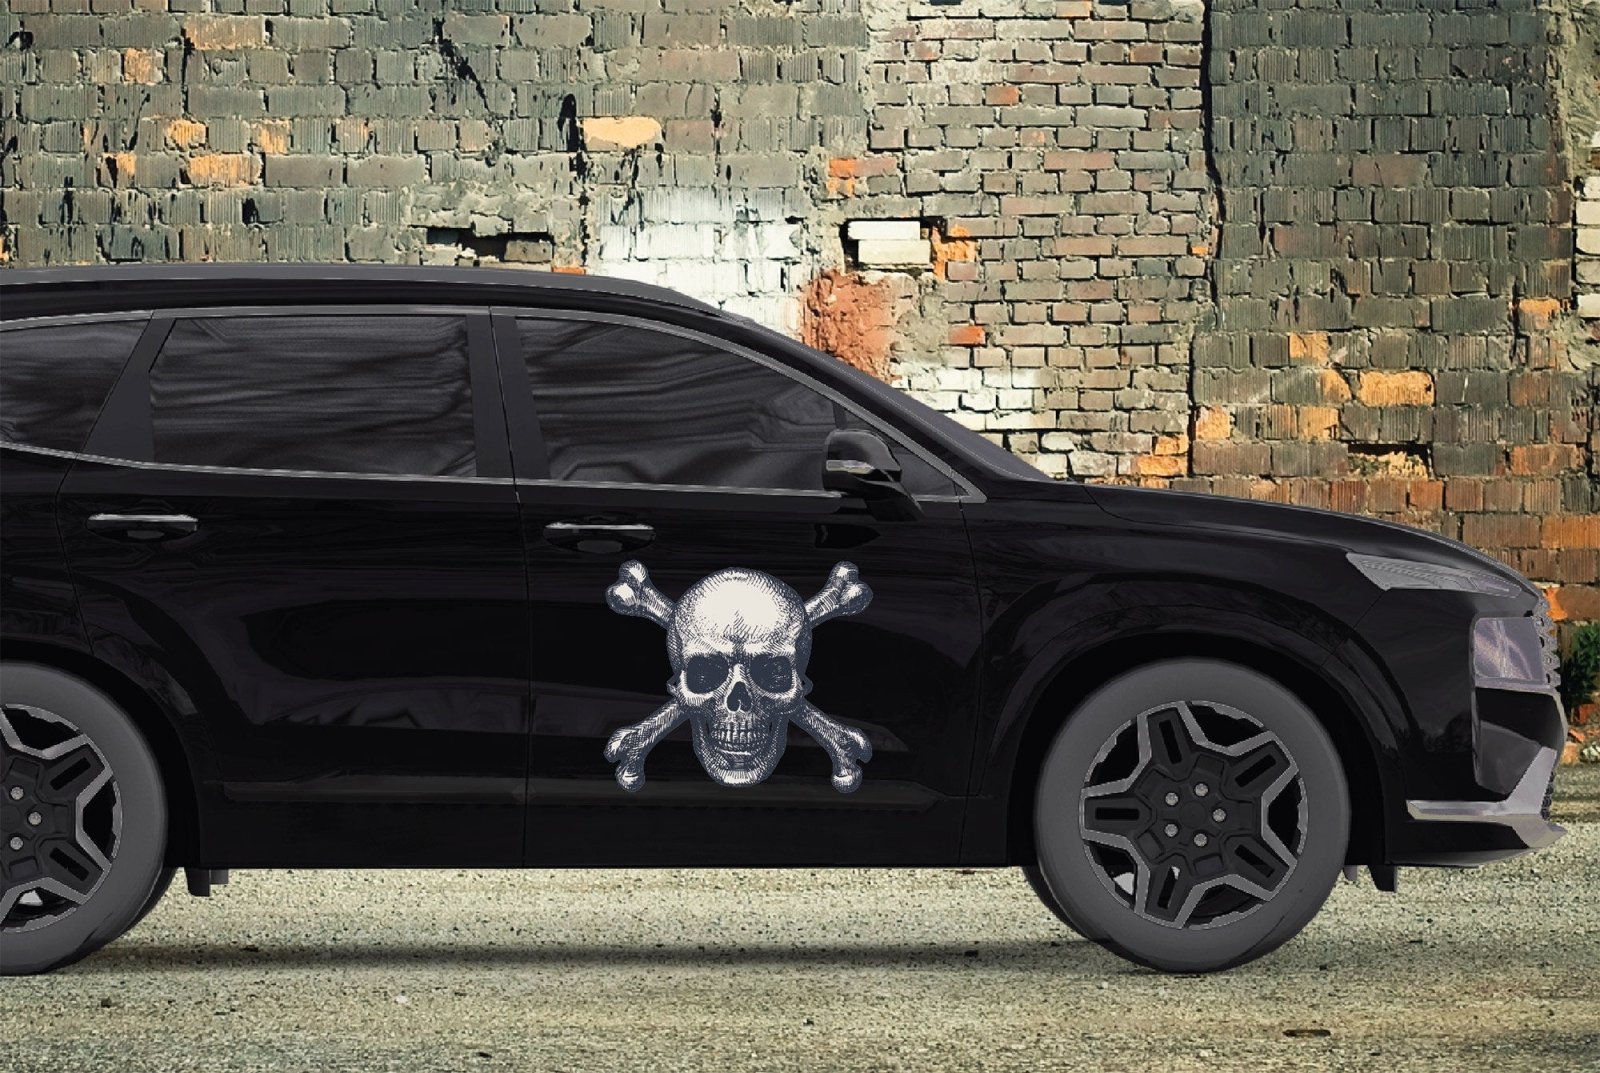 Skull and Bones Car Side Decal Kit! www.DeluxeDecals.net